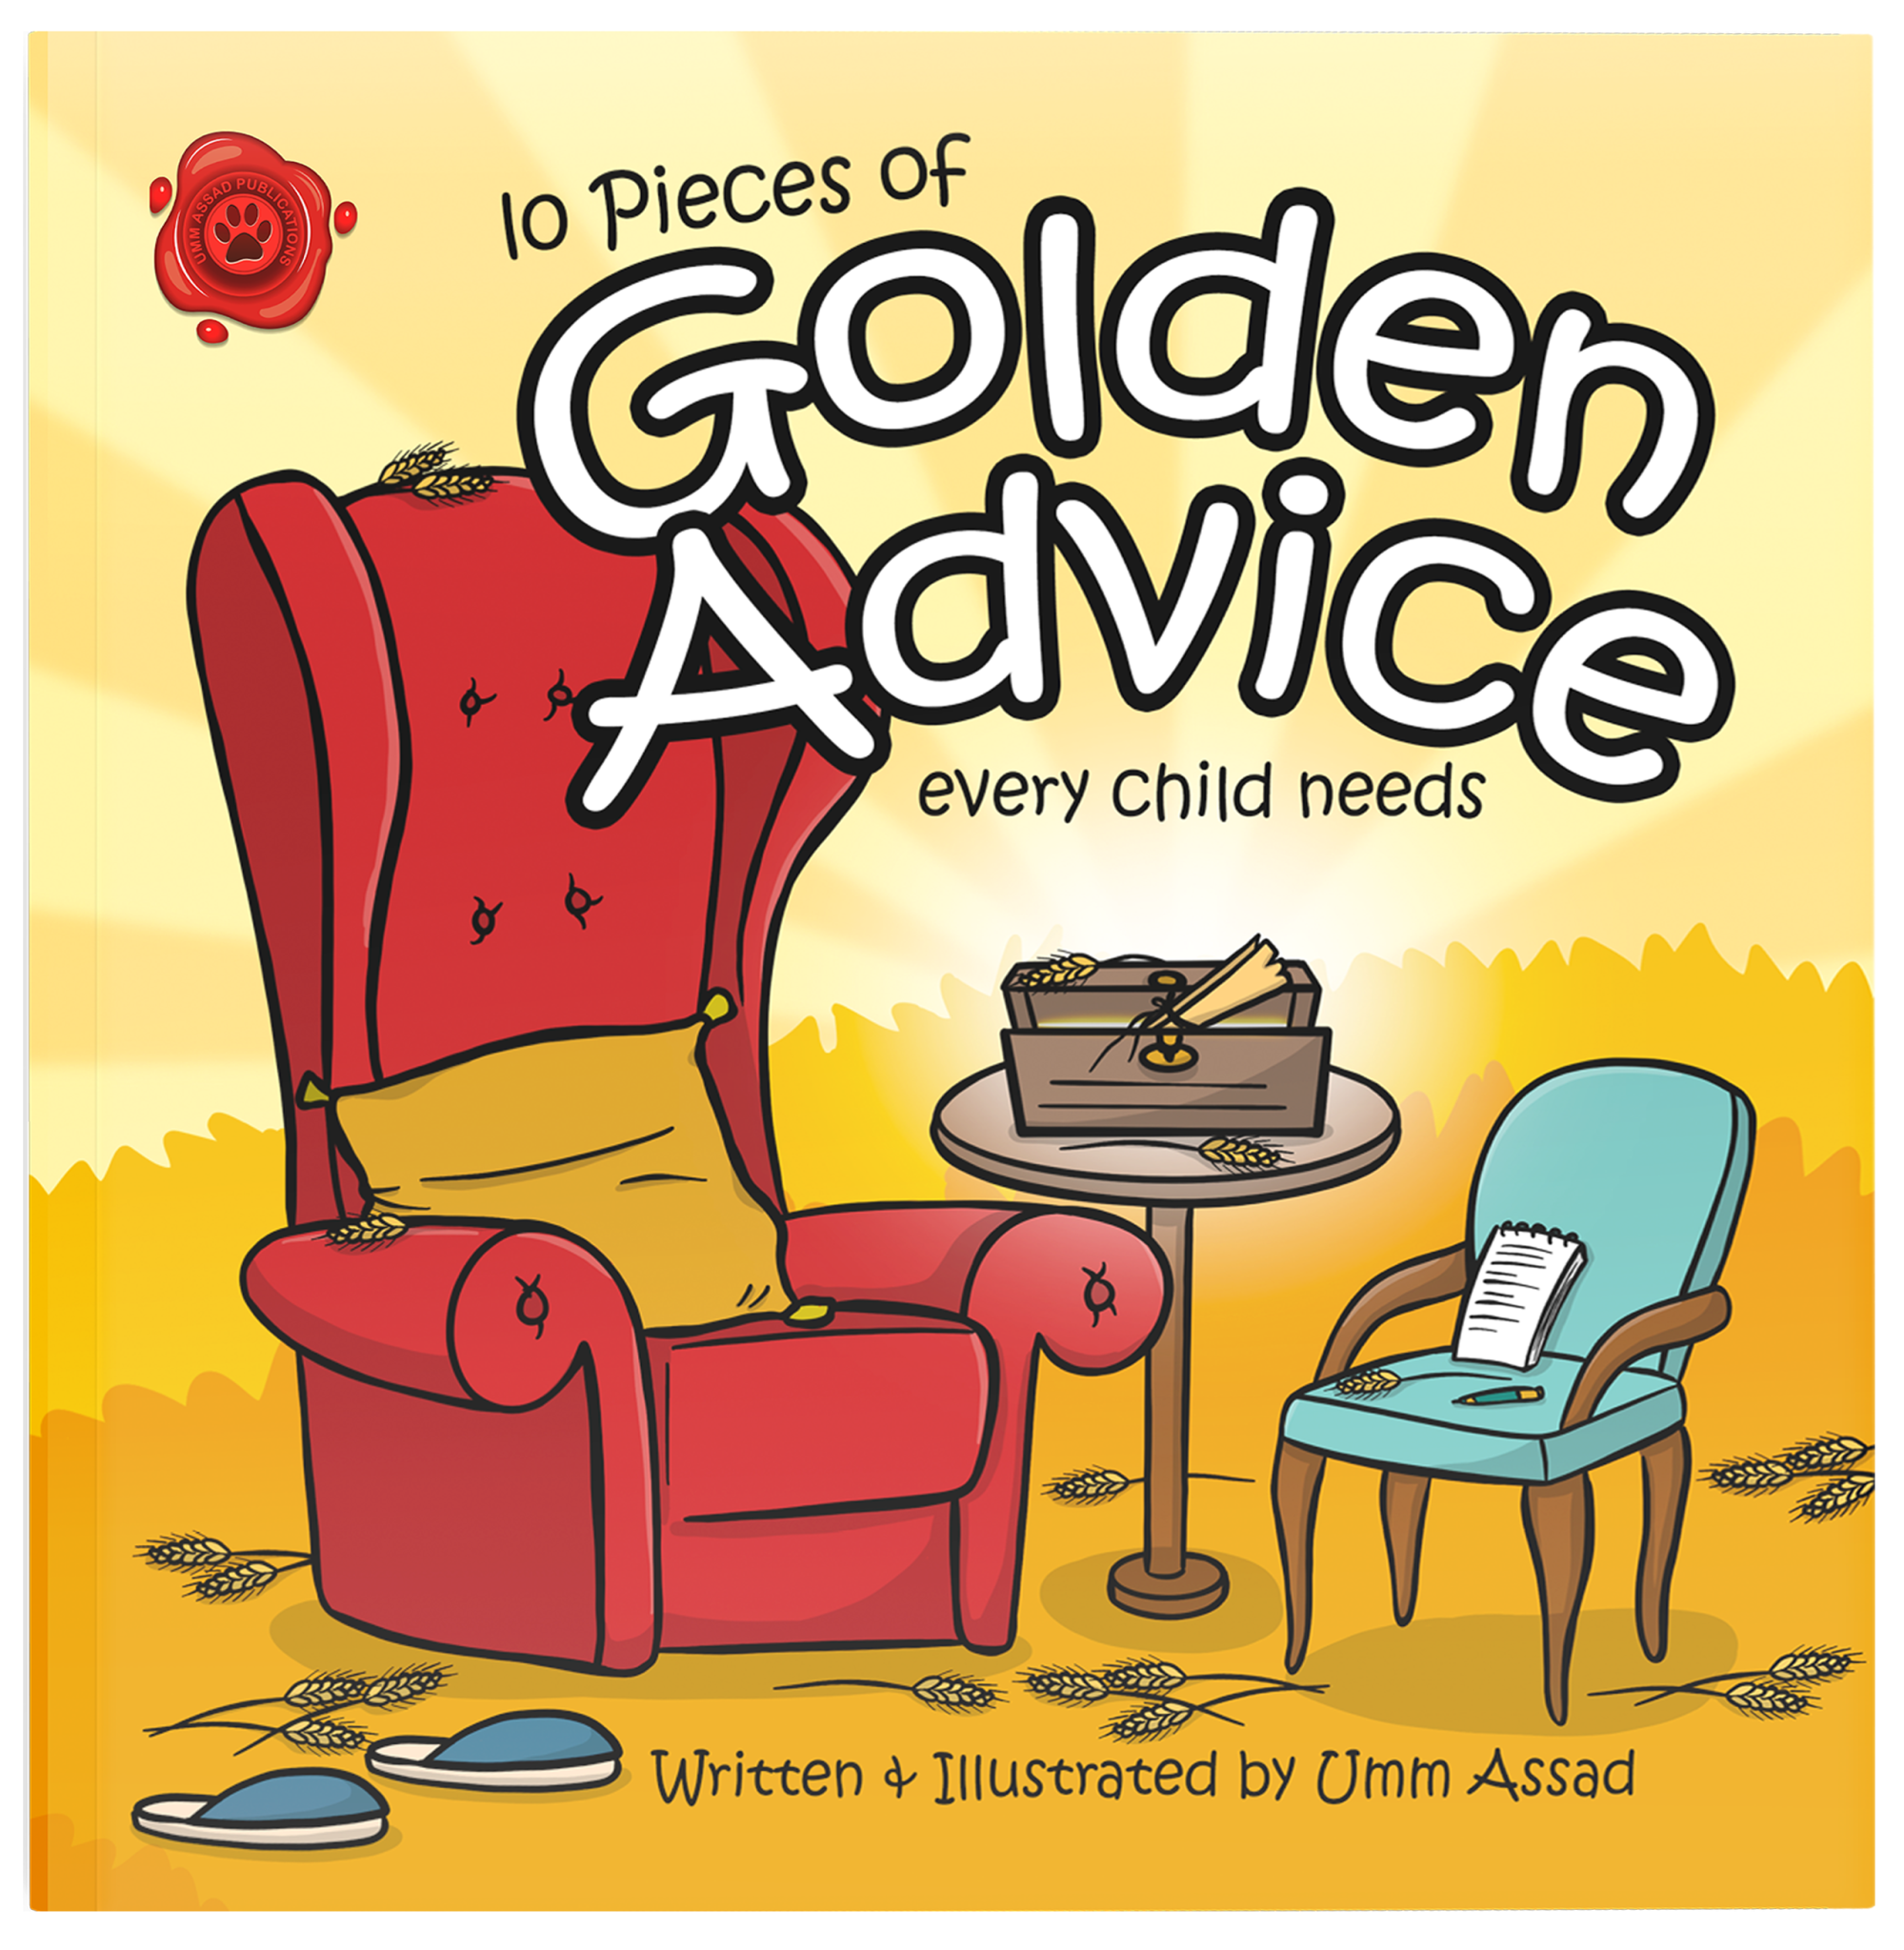 10 Pieces Of Golden Advice Every Child Needs